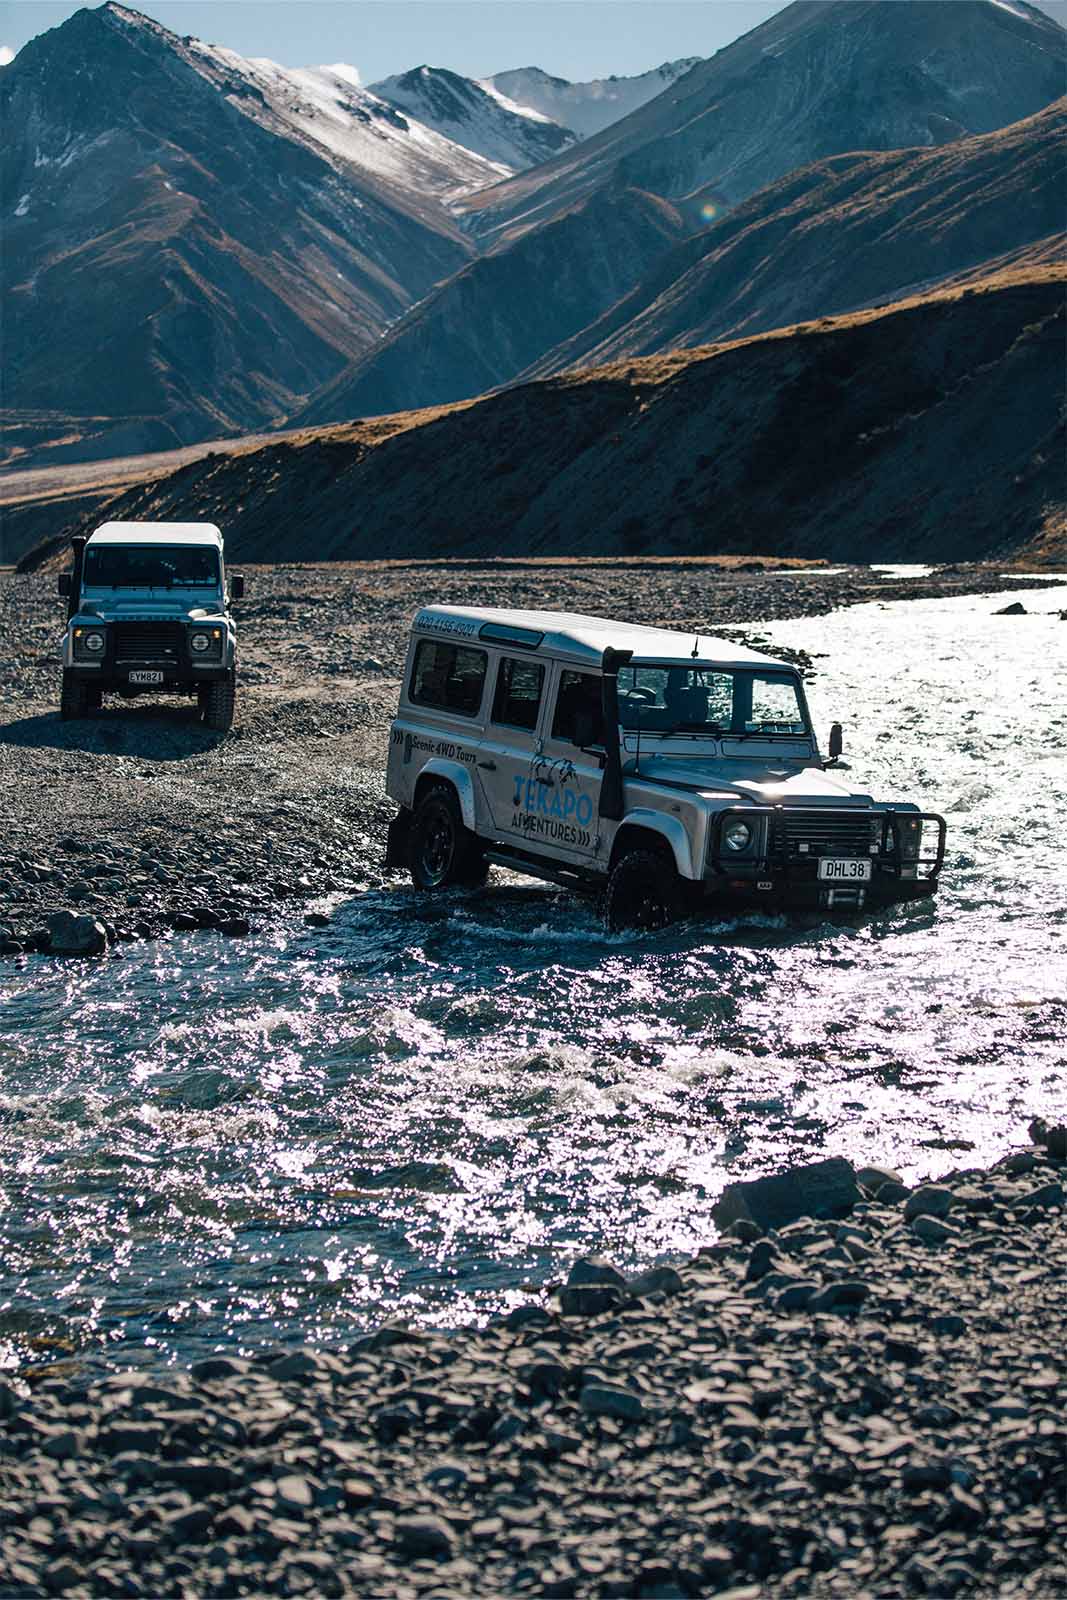 Tekapo Adventures Land Rover crossing river with another Land Rover following